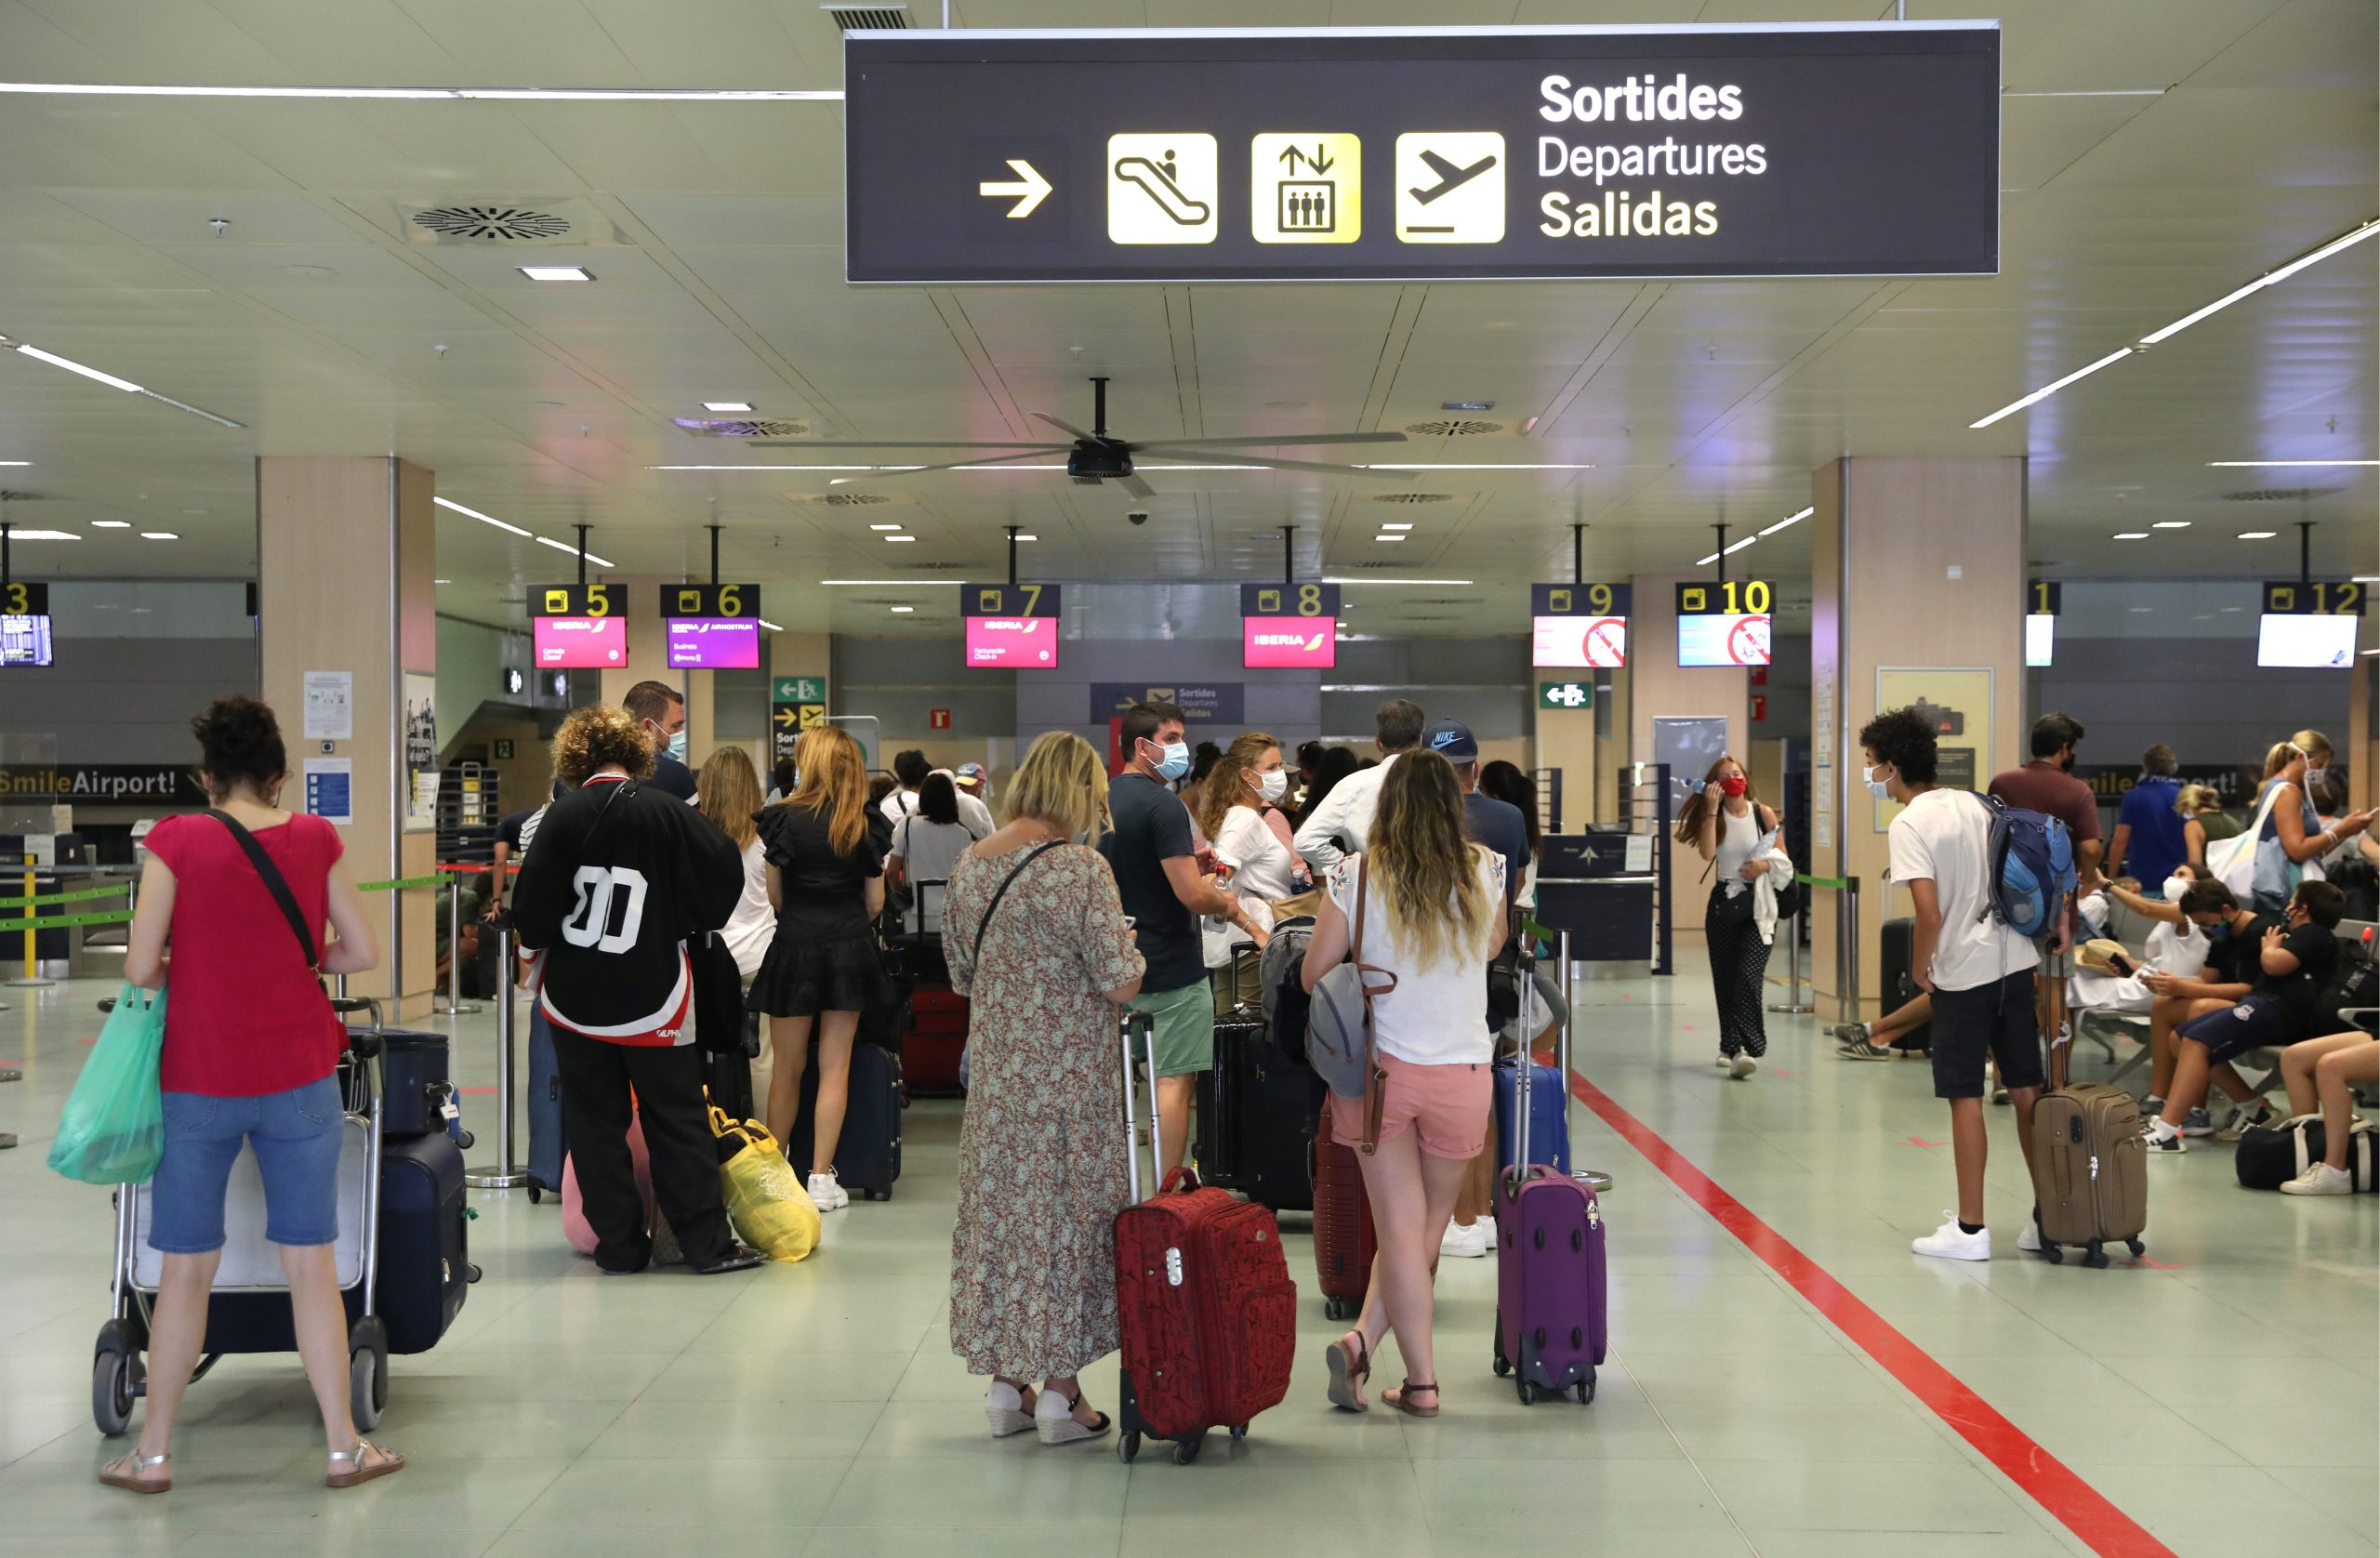 Flights cancelled and delayed at major airport in Spain today due to issues with the runway